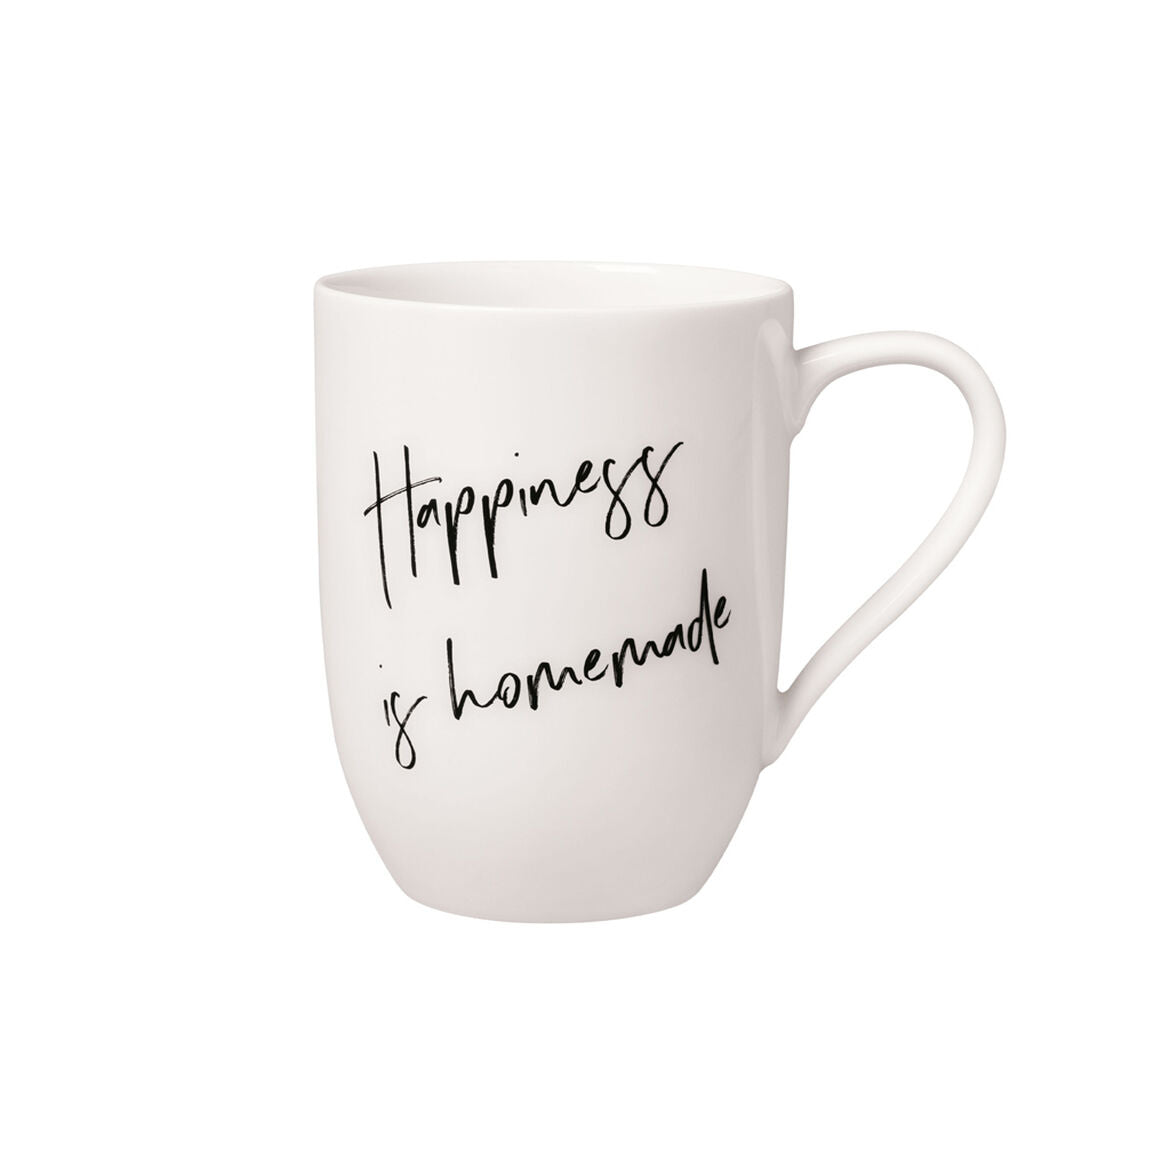 Villeroy and Boch Statement Mug Happiness is Homemade